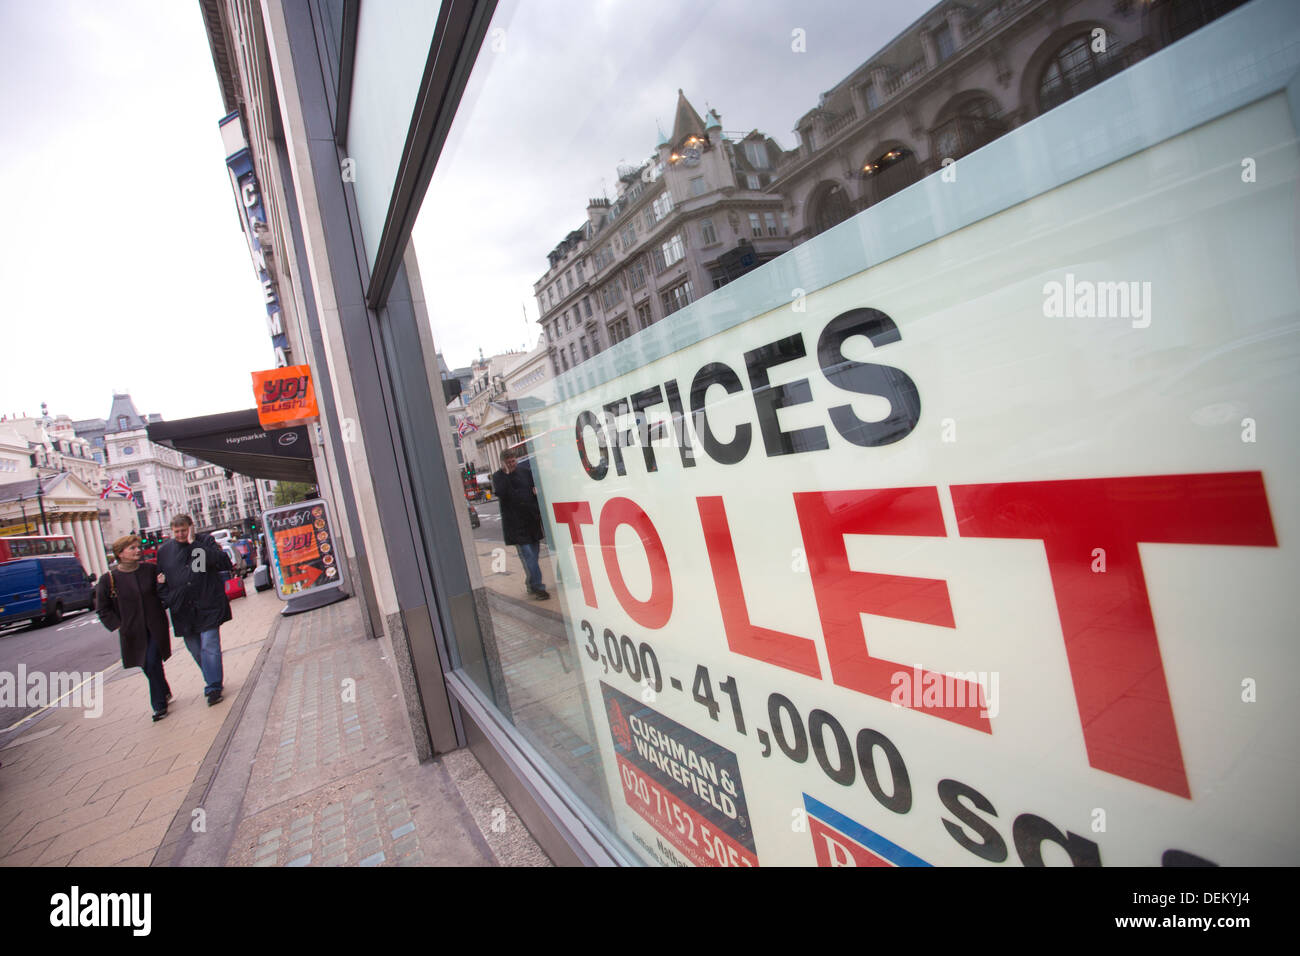 Offices To Let sign in commercial property window in Central London, England, UK Stock Photo